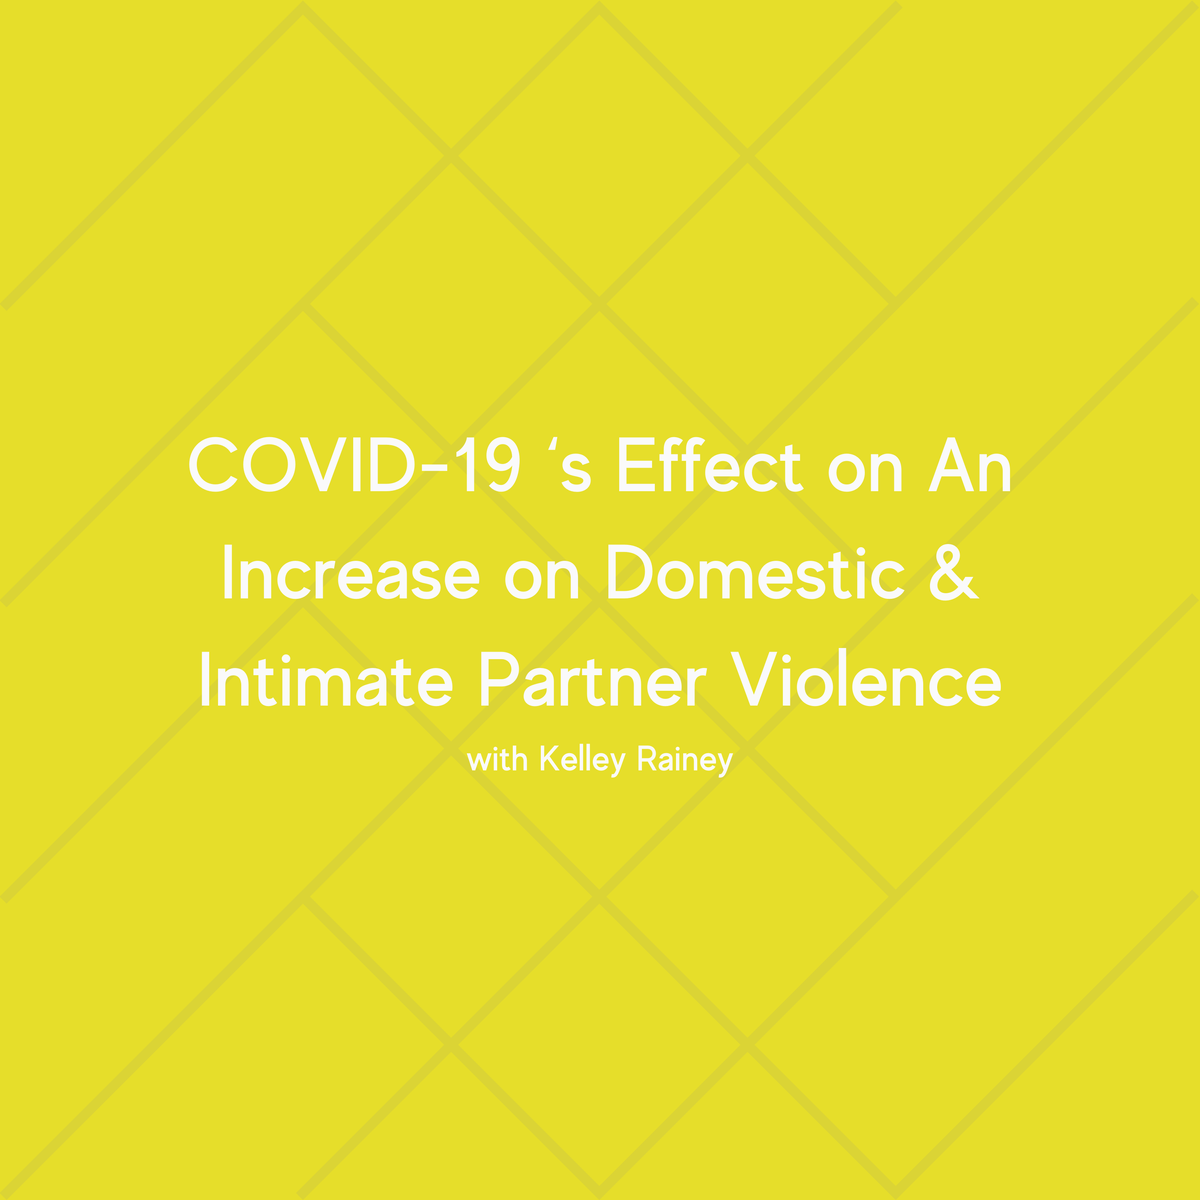 COVID-19 ‘s Effect on An Increase on Domestic & Intimate Partner Violence with Kelley Rainey